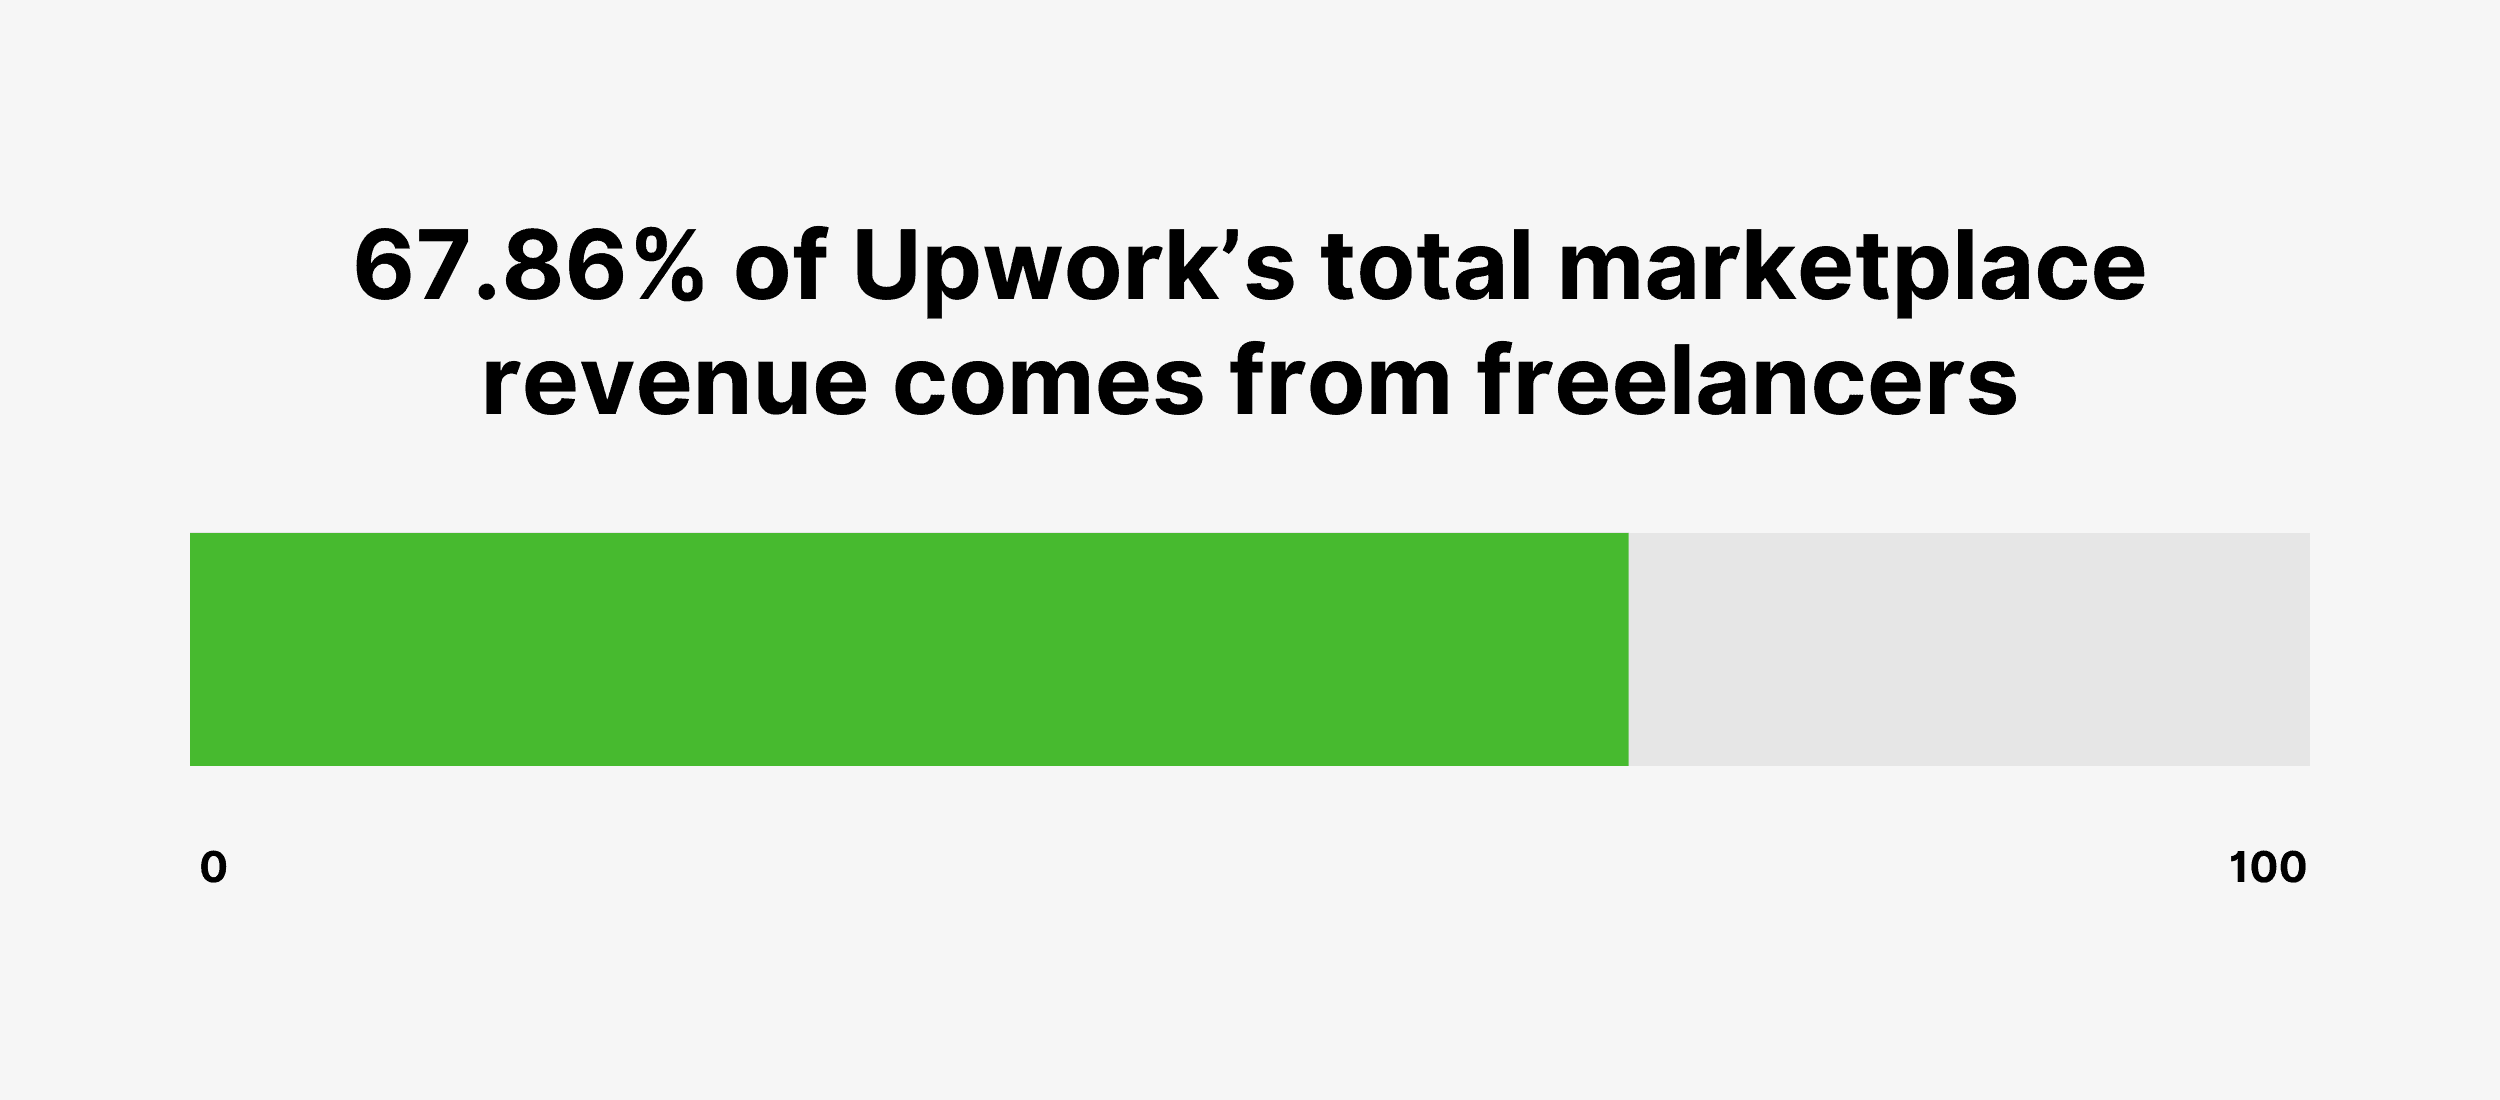 67.86% of Upwork’s total marketplace revenue comes from freelancers